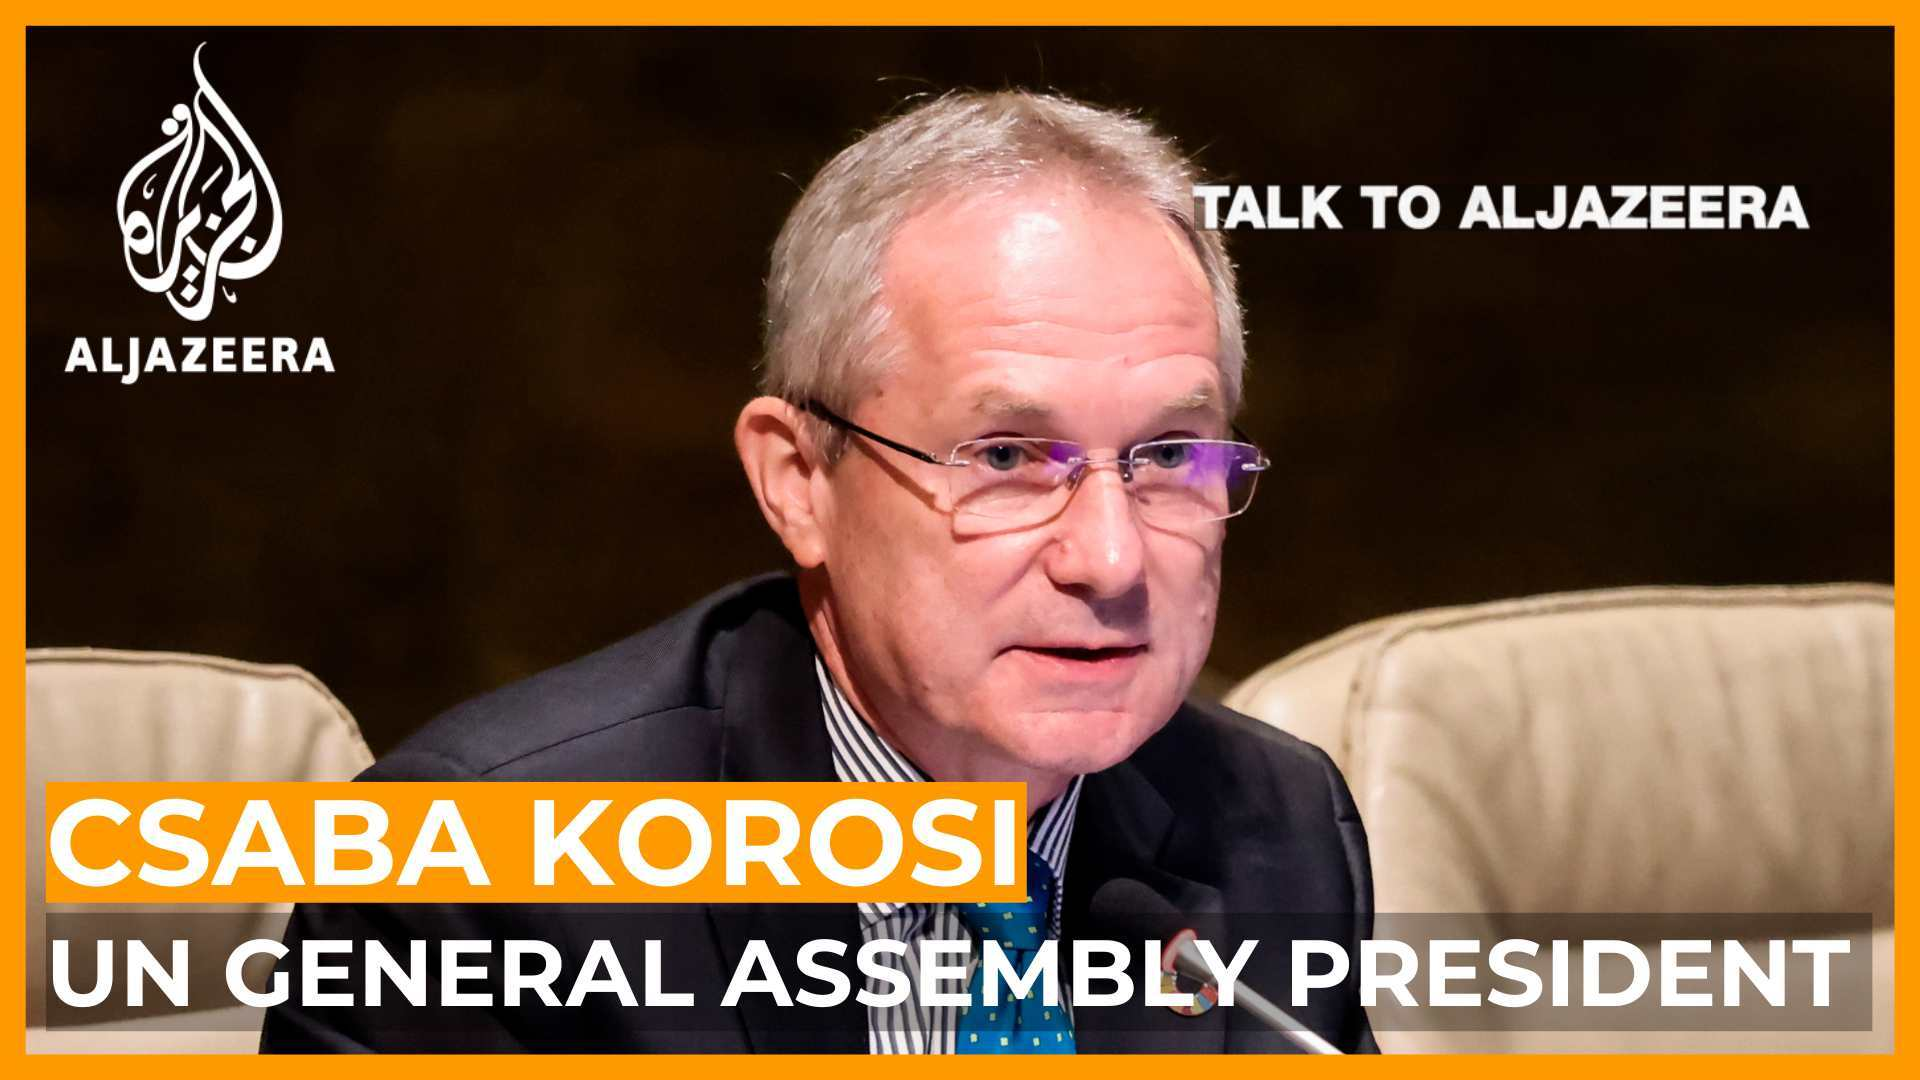 Csaba Korosi: Can the UN be led by those urging peace, not war? | Talk to Al Jazeera